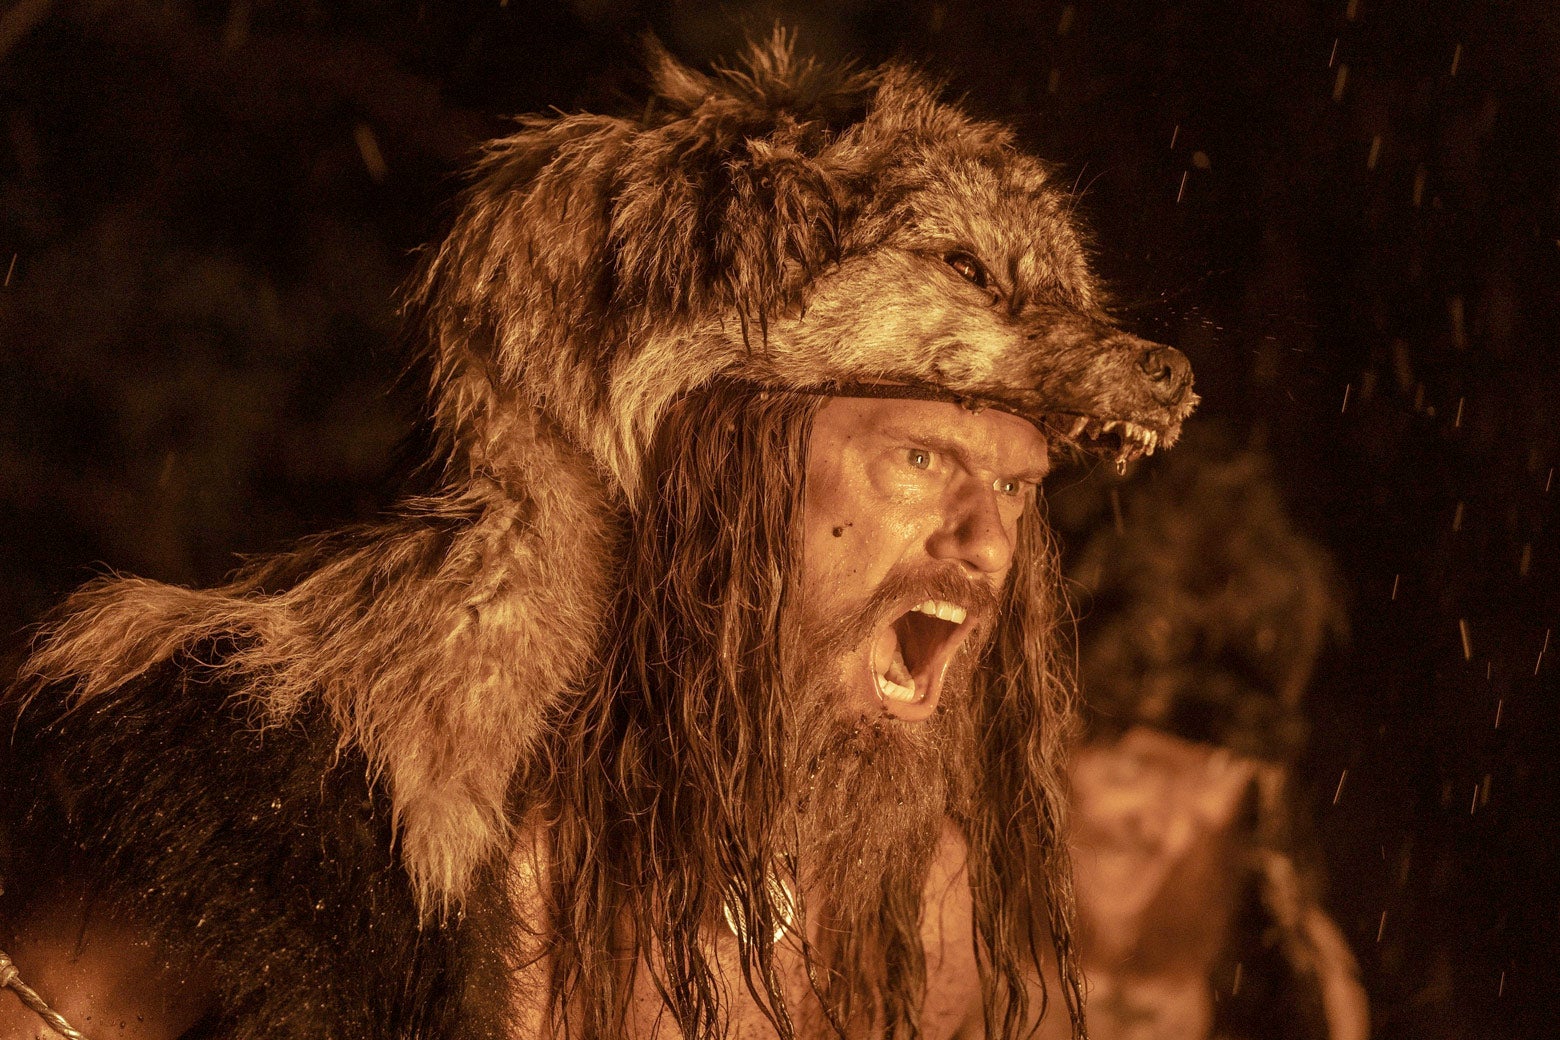 Alexander Skarsgard wears a wolf head and screams in a trance, his face ablaze with the light from a bonfire